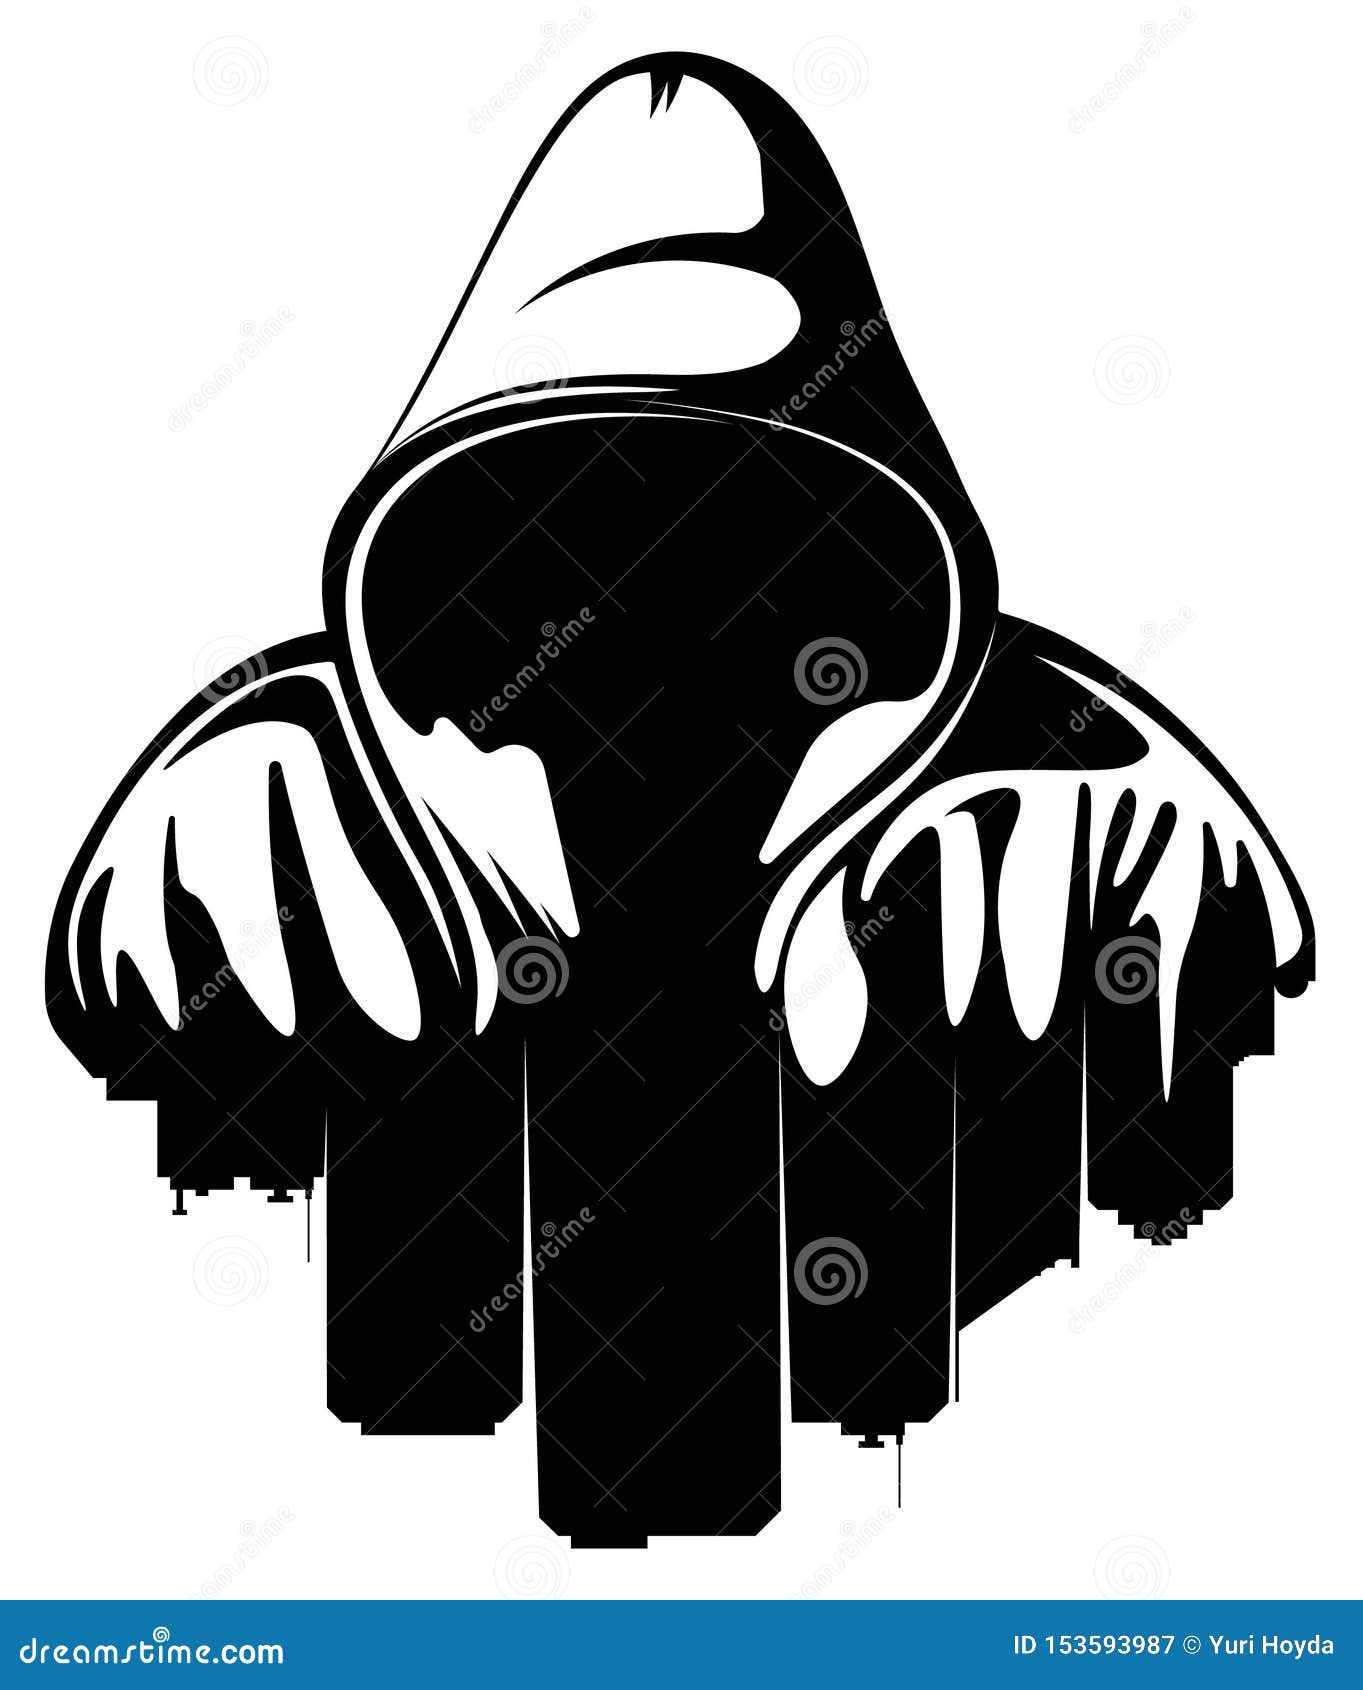 Hooded Cartoons, Illustrations & Vector Stock Images - 5560 Pictures to ...